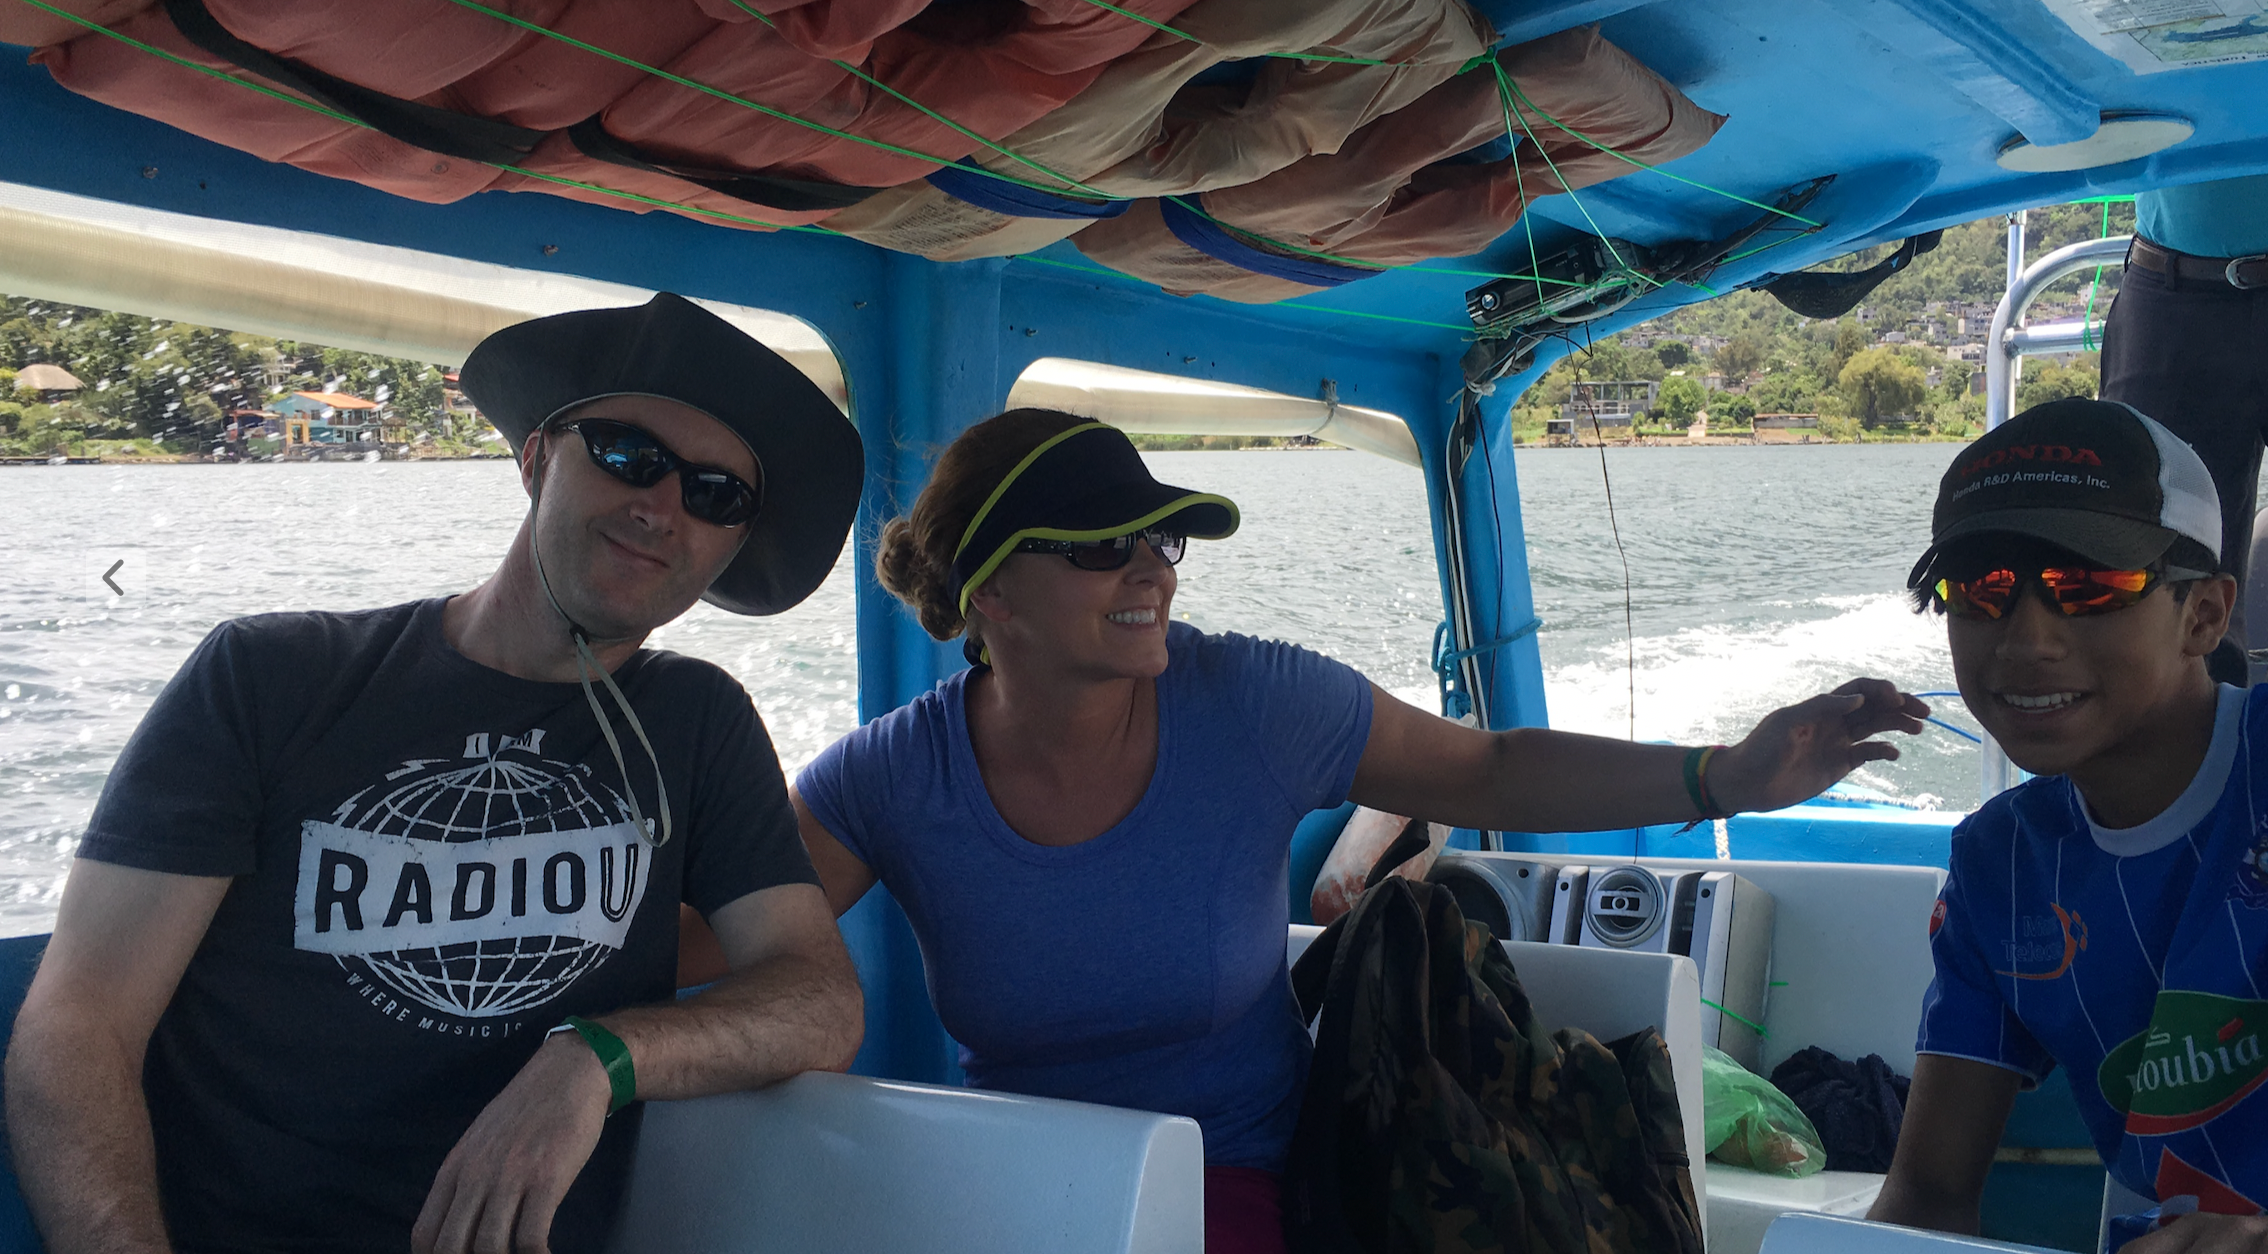 It is easy to meet new friends when traveling on the public boats around Lake Atitlan.